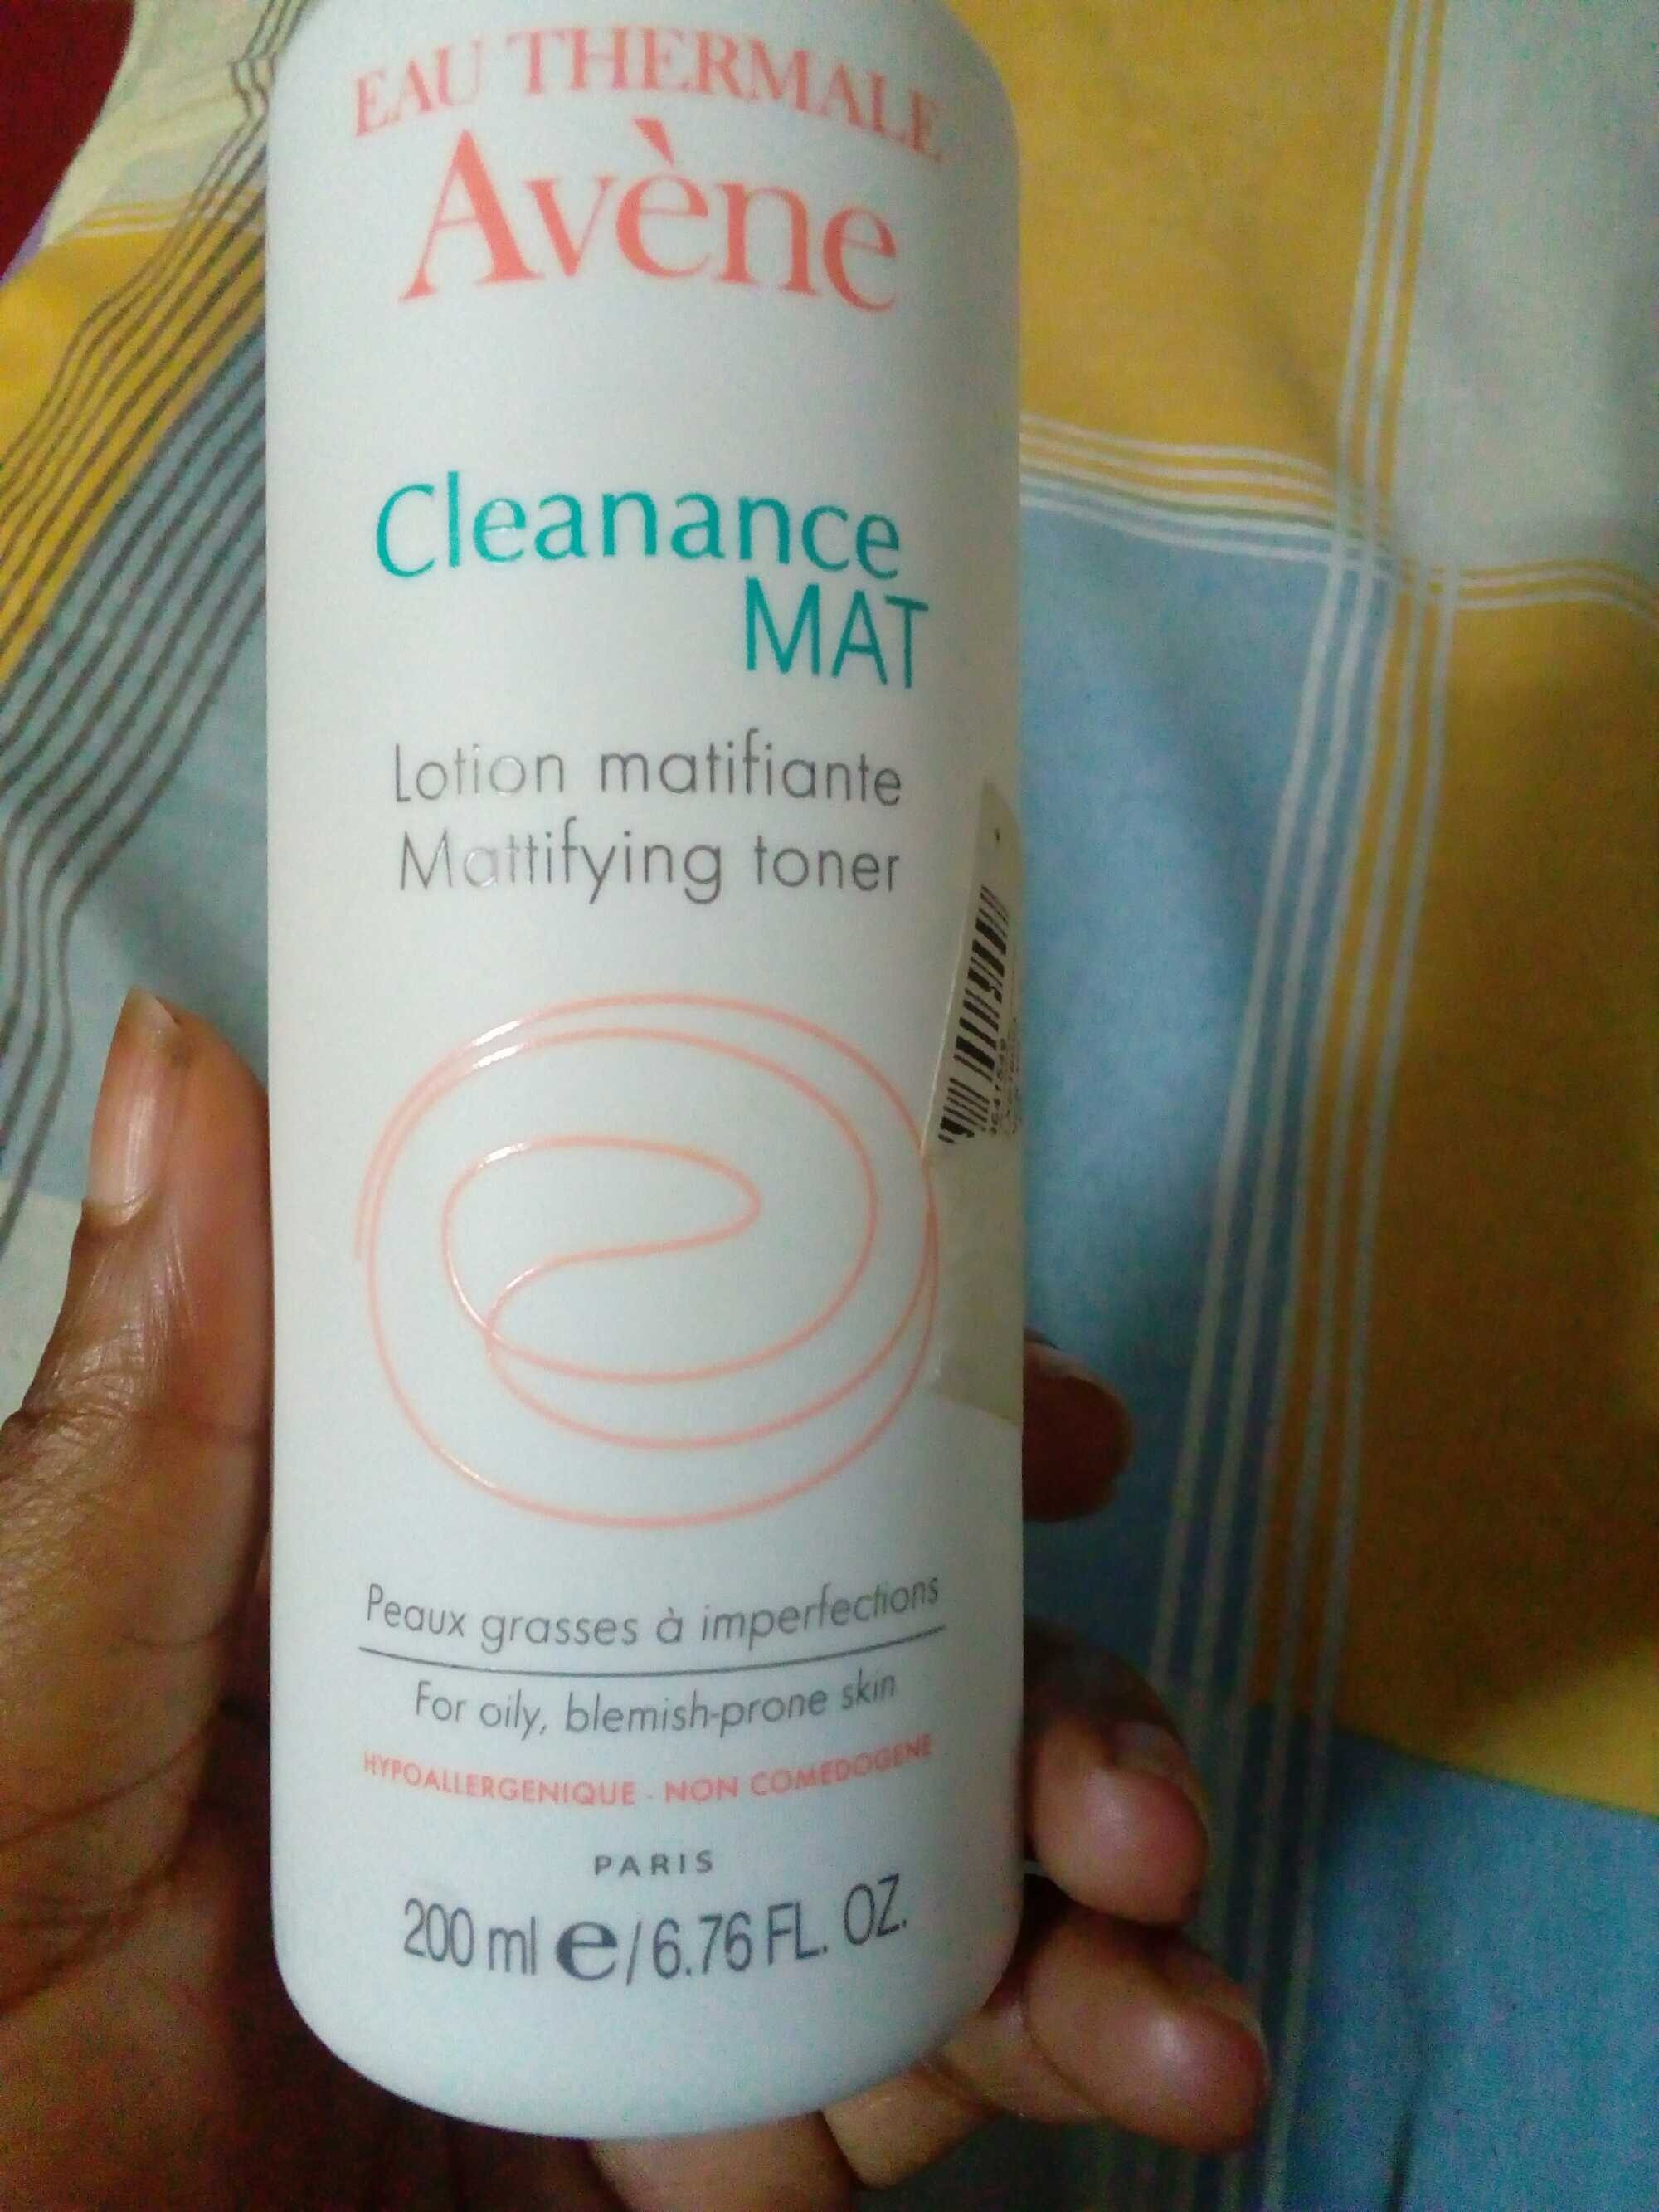 Lotion matifiante cleanance mat - Product - fr